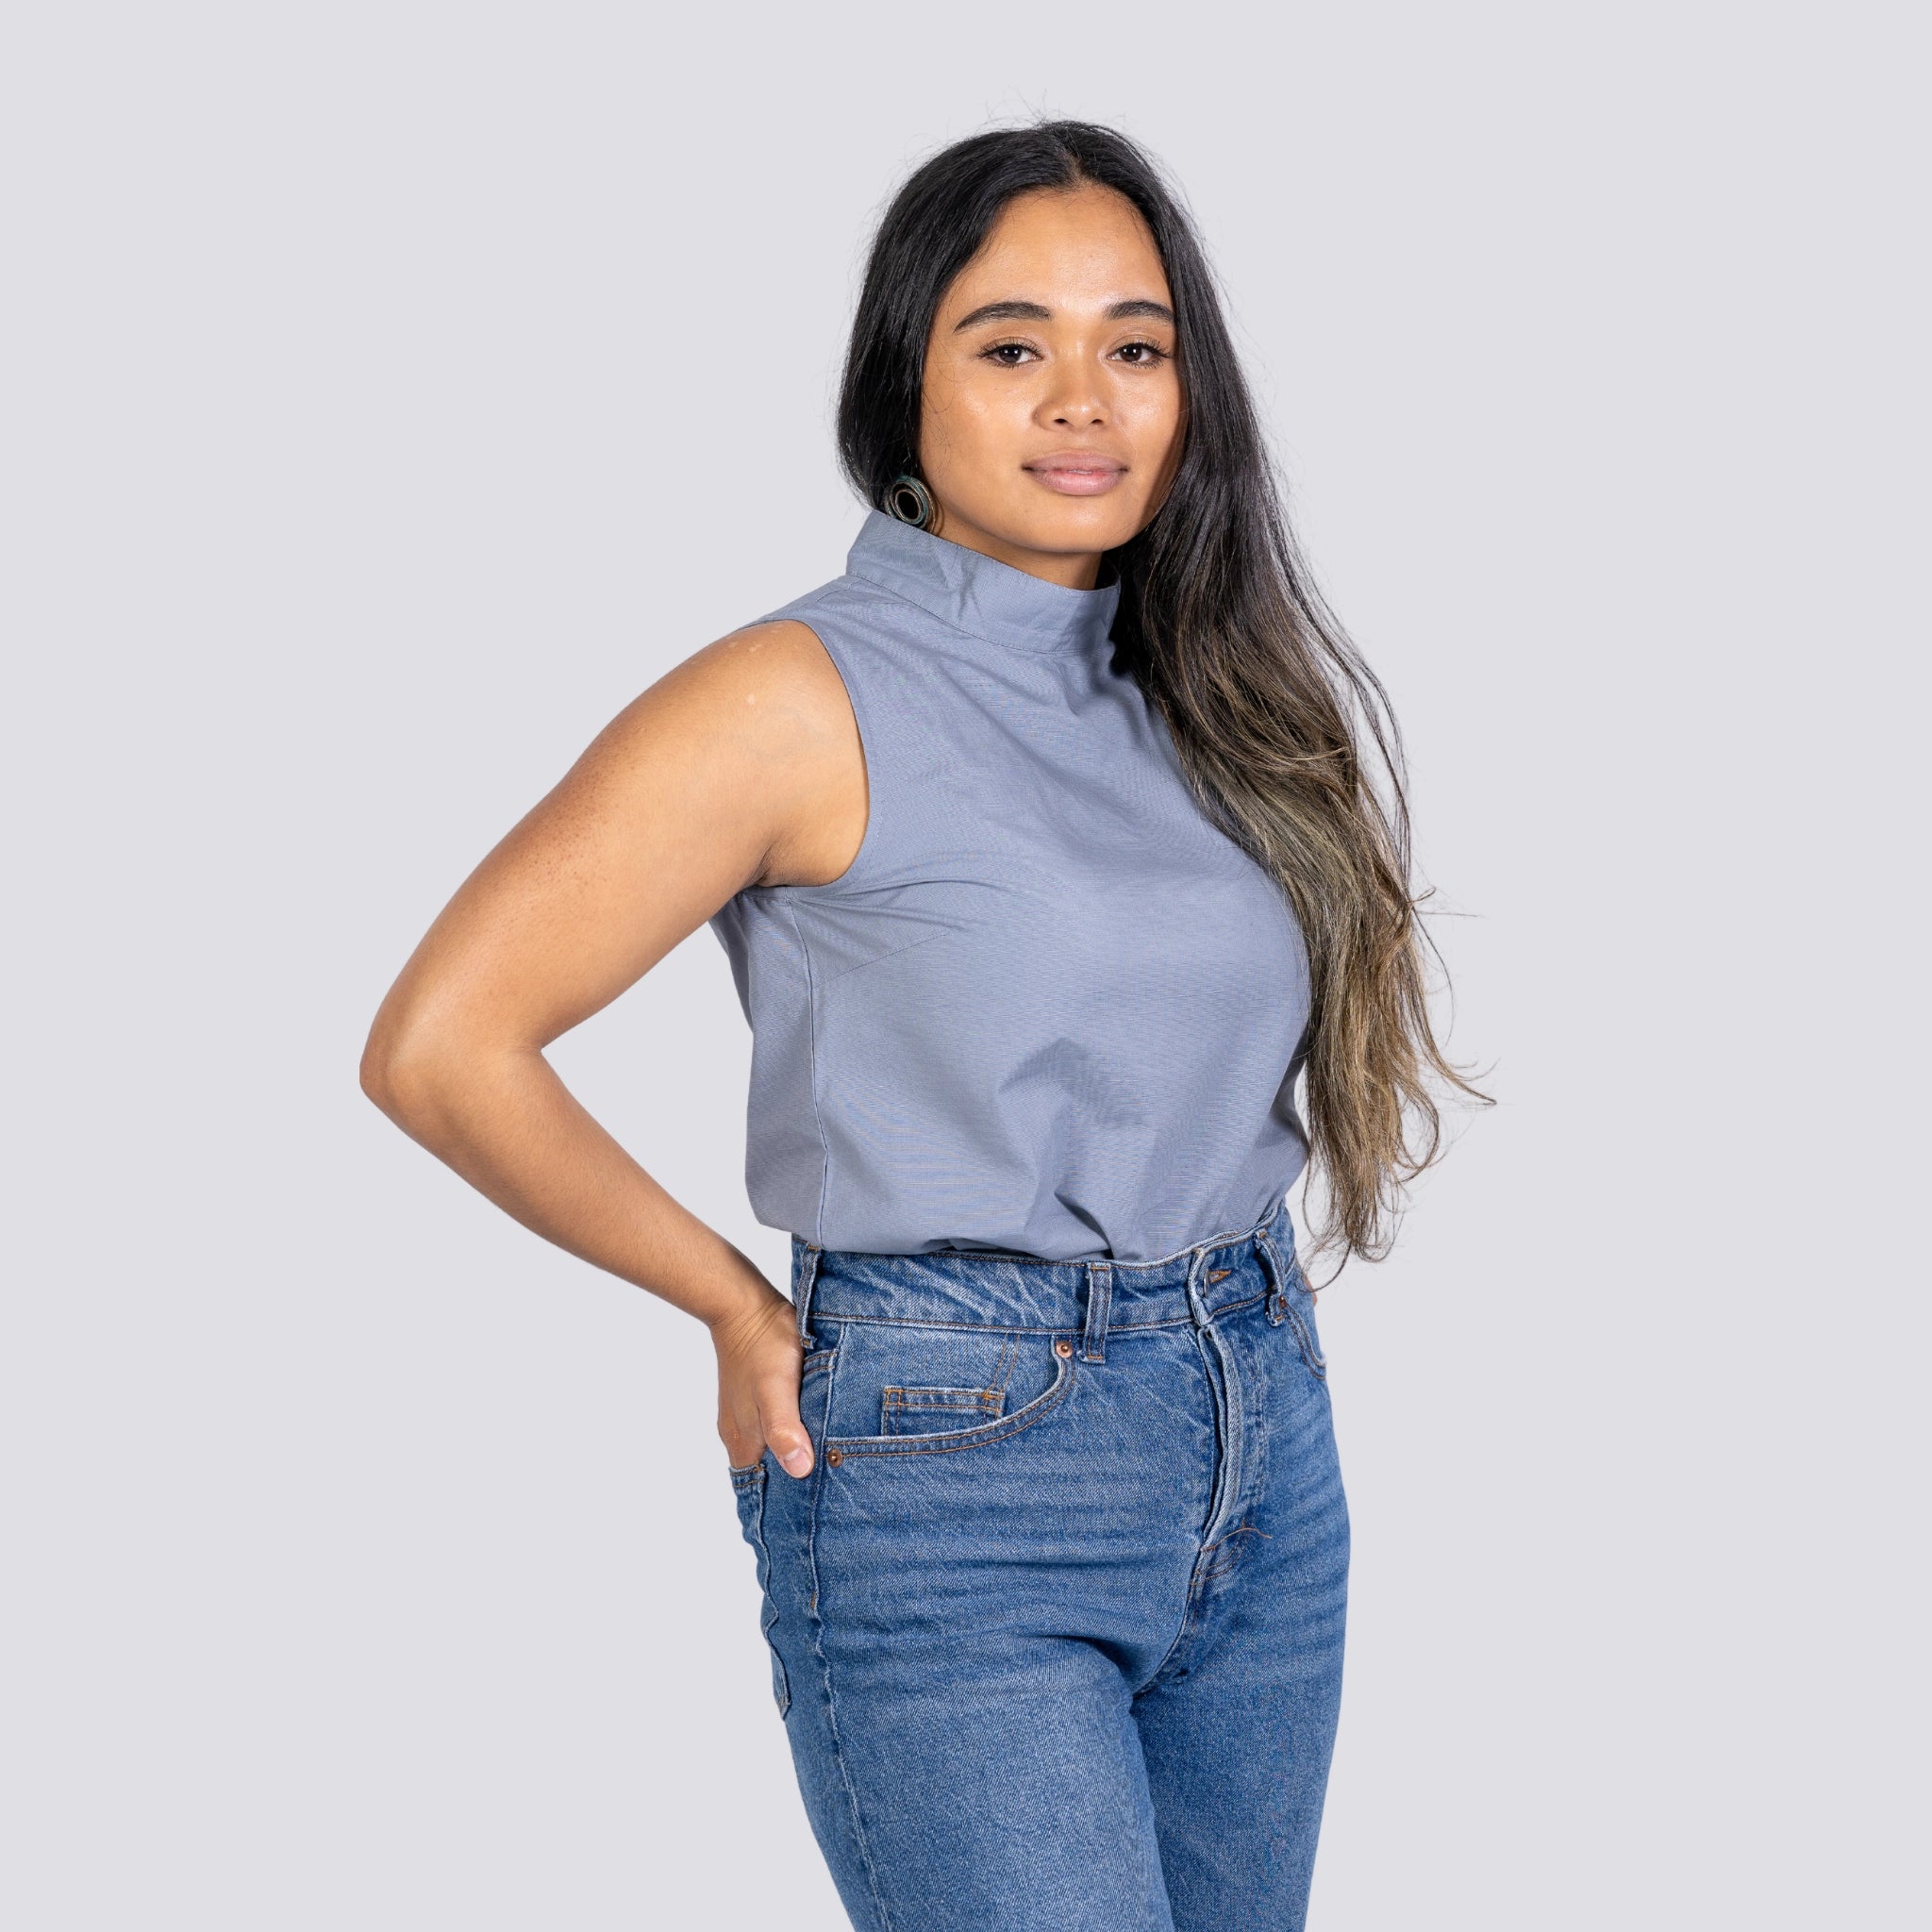 Woman in a Karee Linen Sleeveless Top in Classic Grey and jeans posing with her hand on her hip against a gray background.